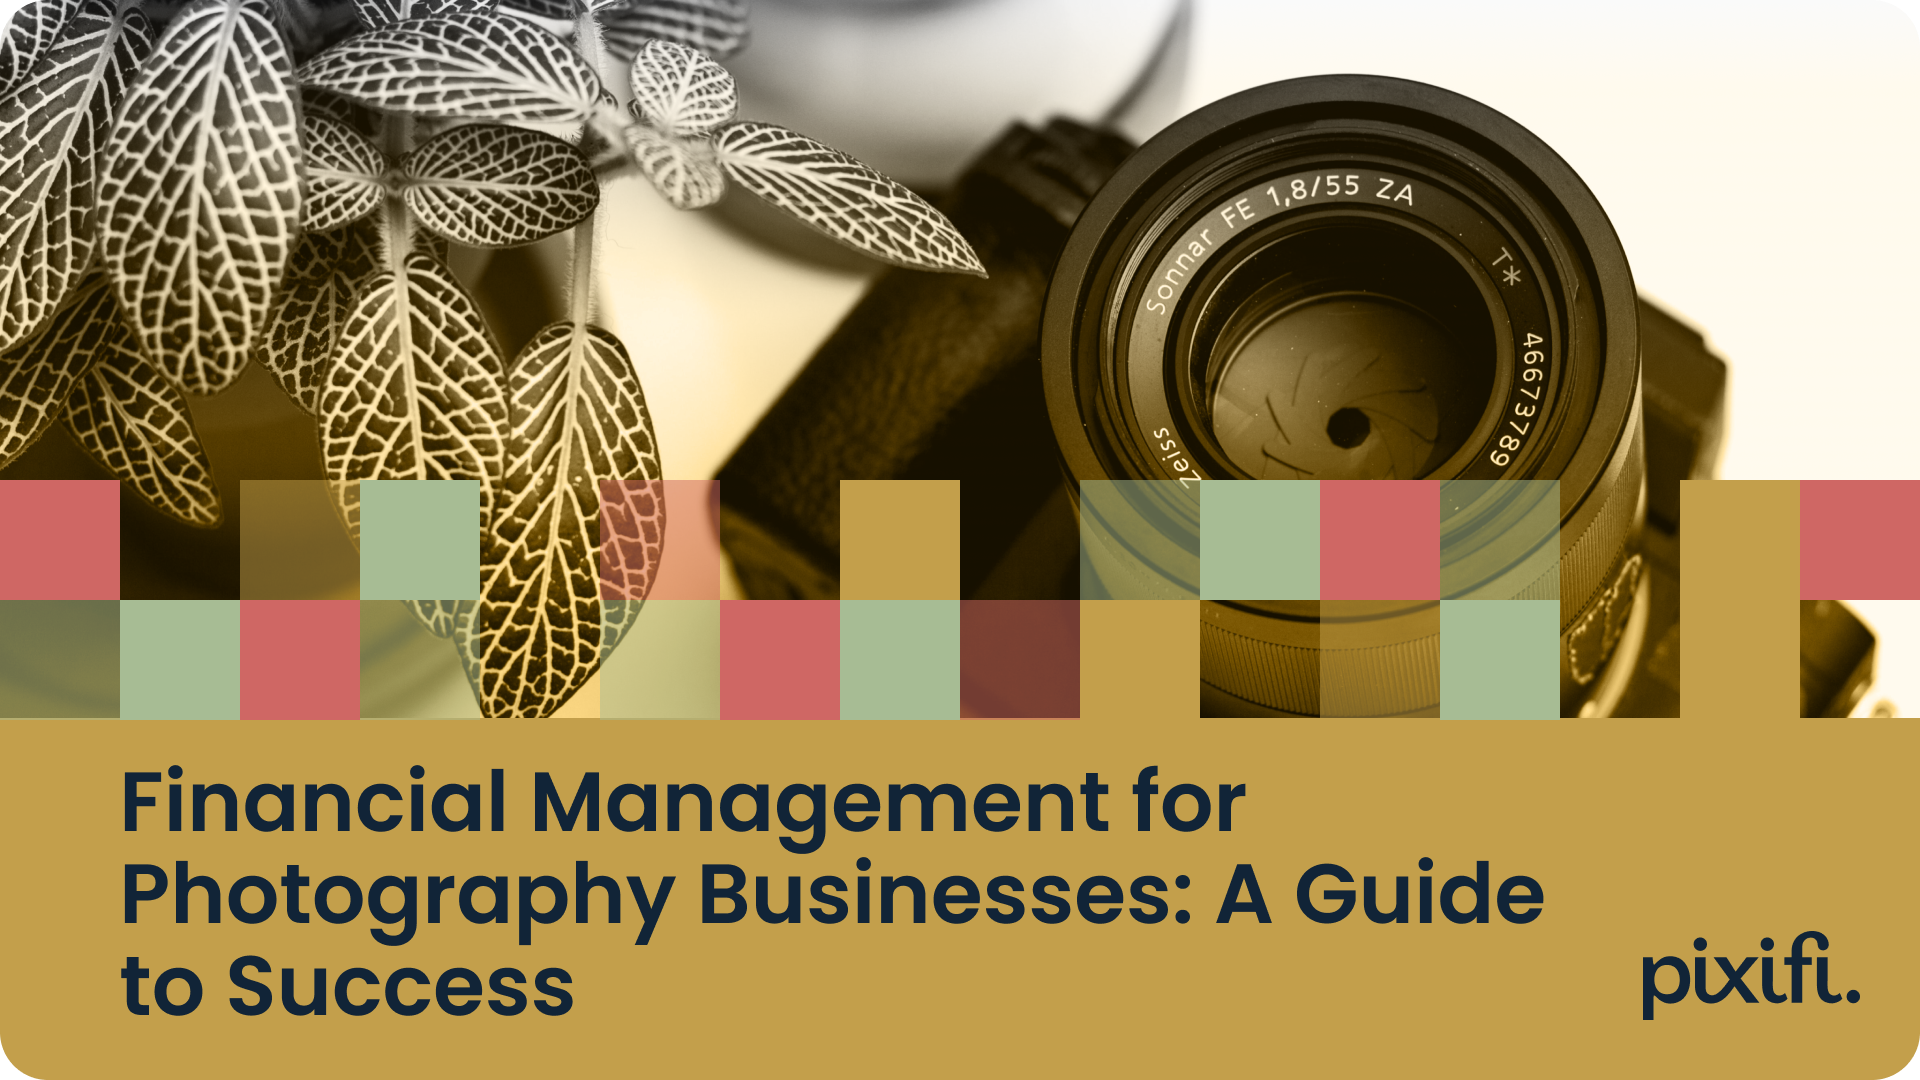 Financial Management for Photography Businesses: A Guide to Success